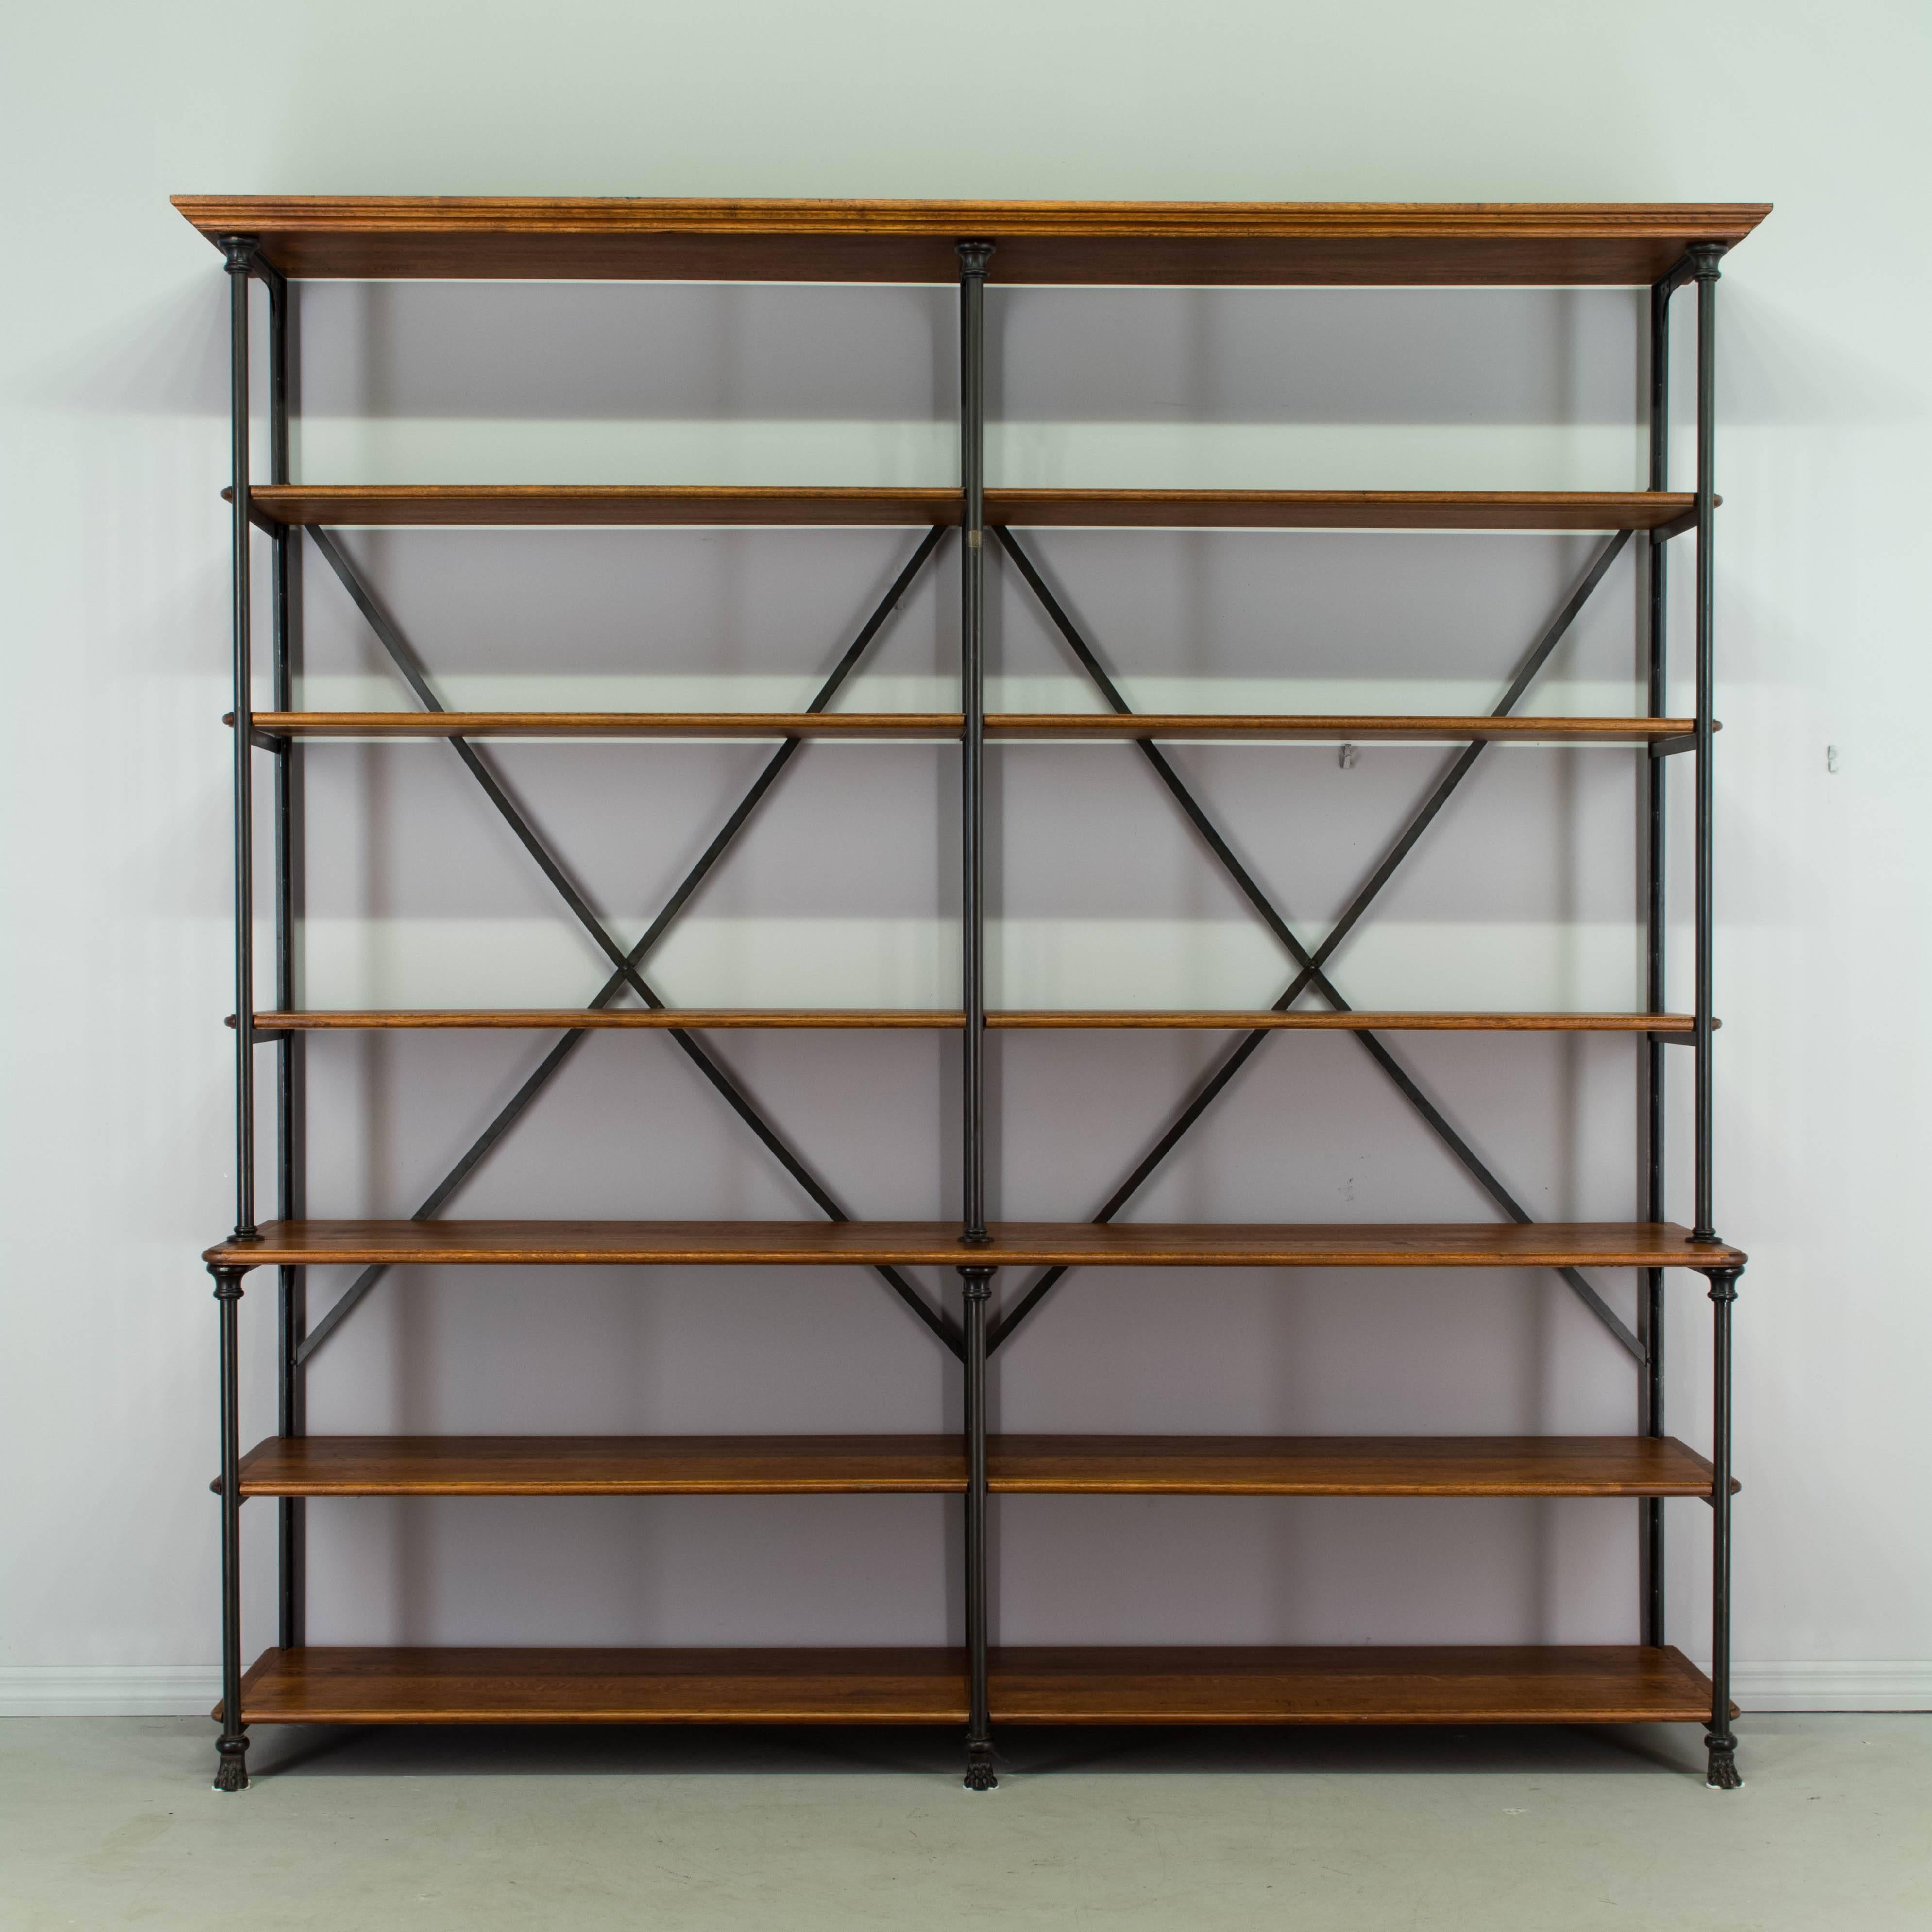 An Industrial étagère by Le Petit Parisien with iron mounted frame and shelves made of Eastern European oak. Very sturdy, heavy frame with X-shaped back supports and decorative cast feet. Subtly detailed, with cornice top and fitted shelves with